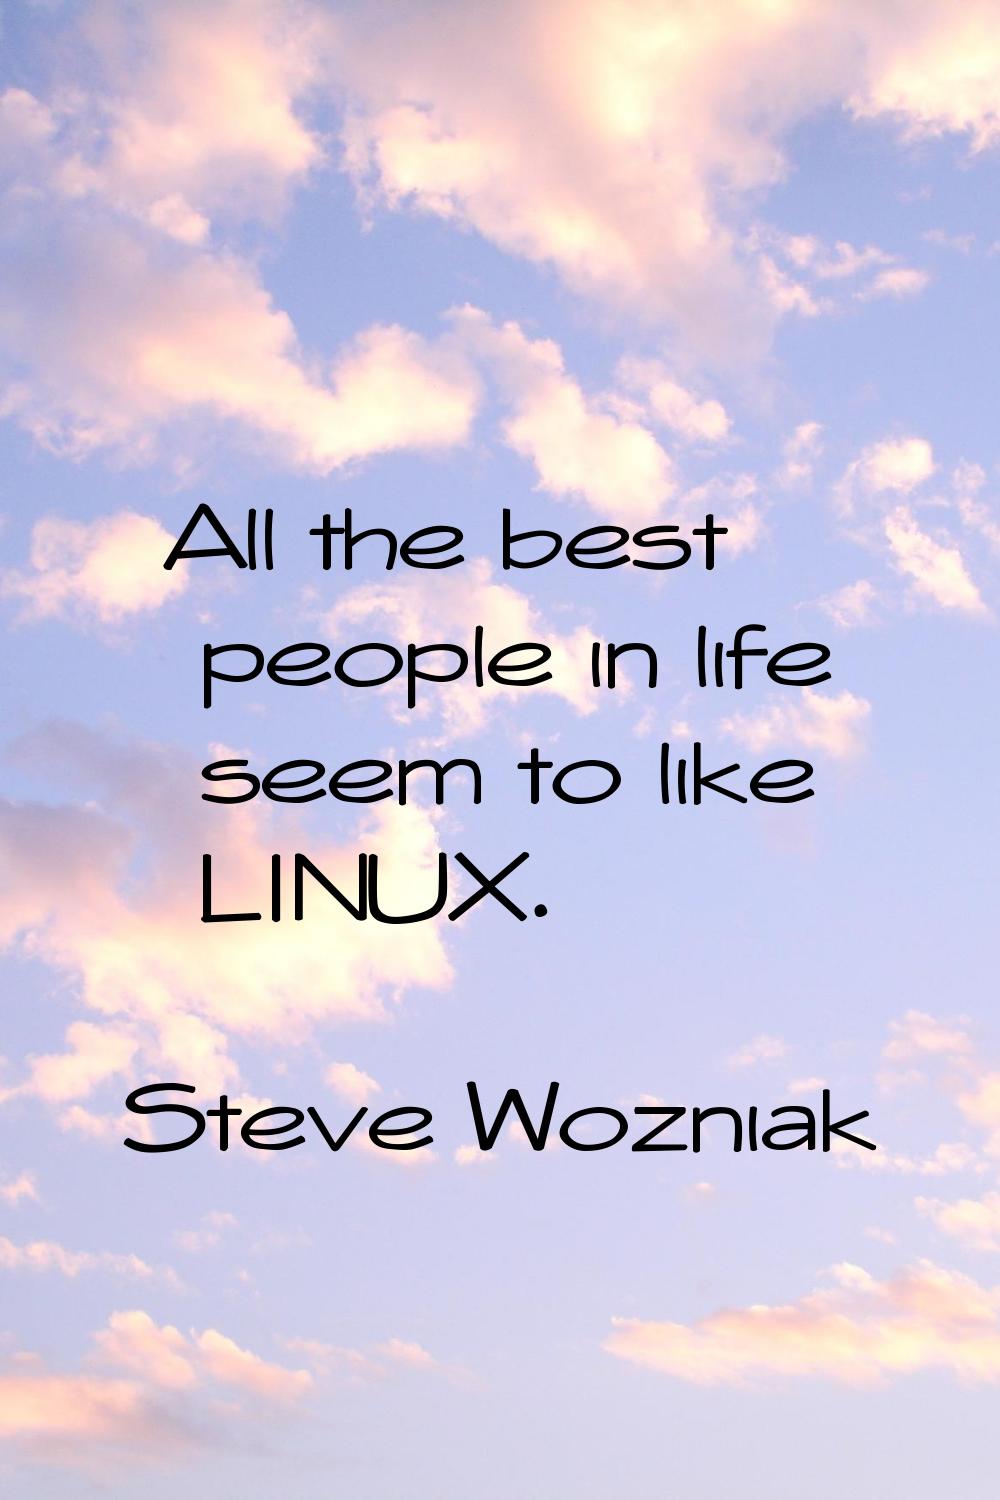 All the best people in life seem to like LINUX.